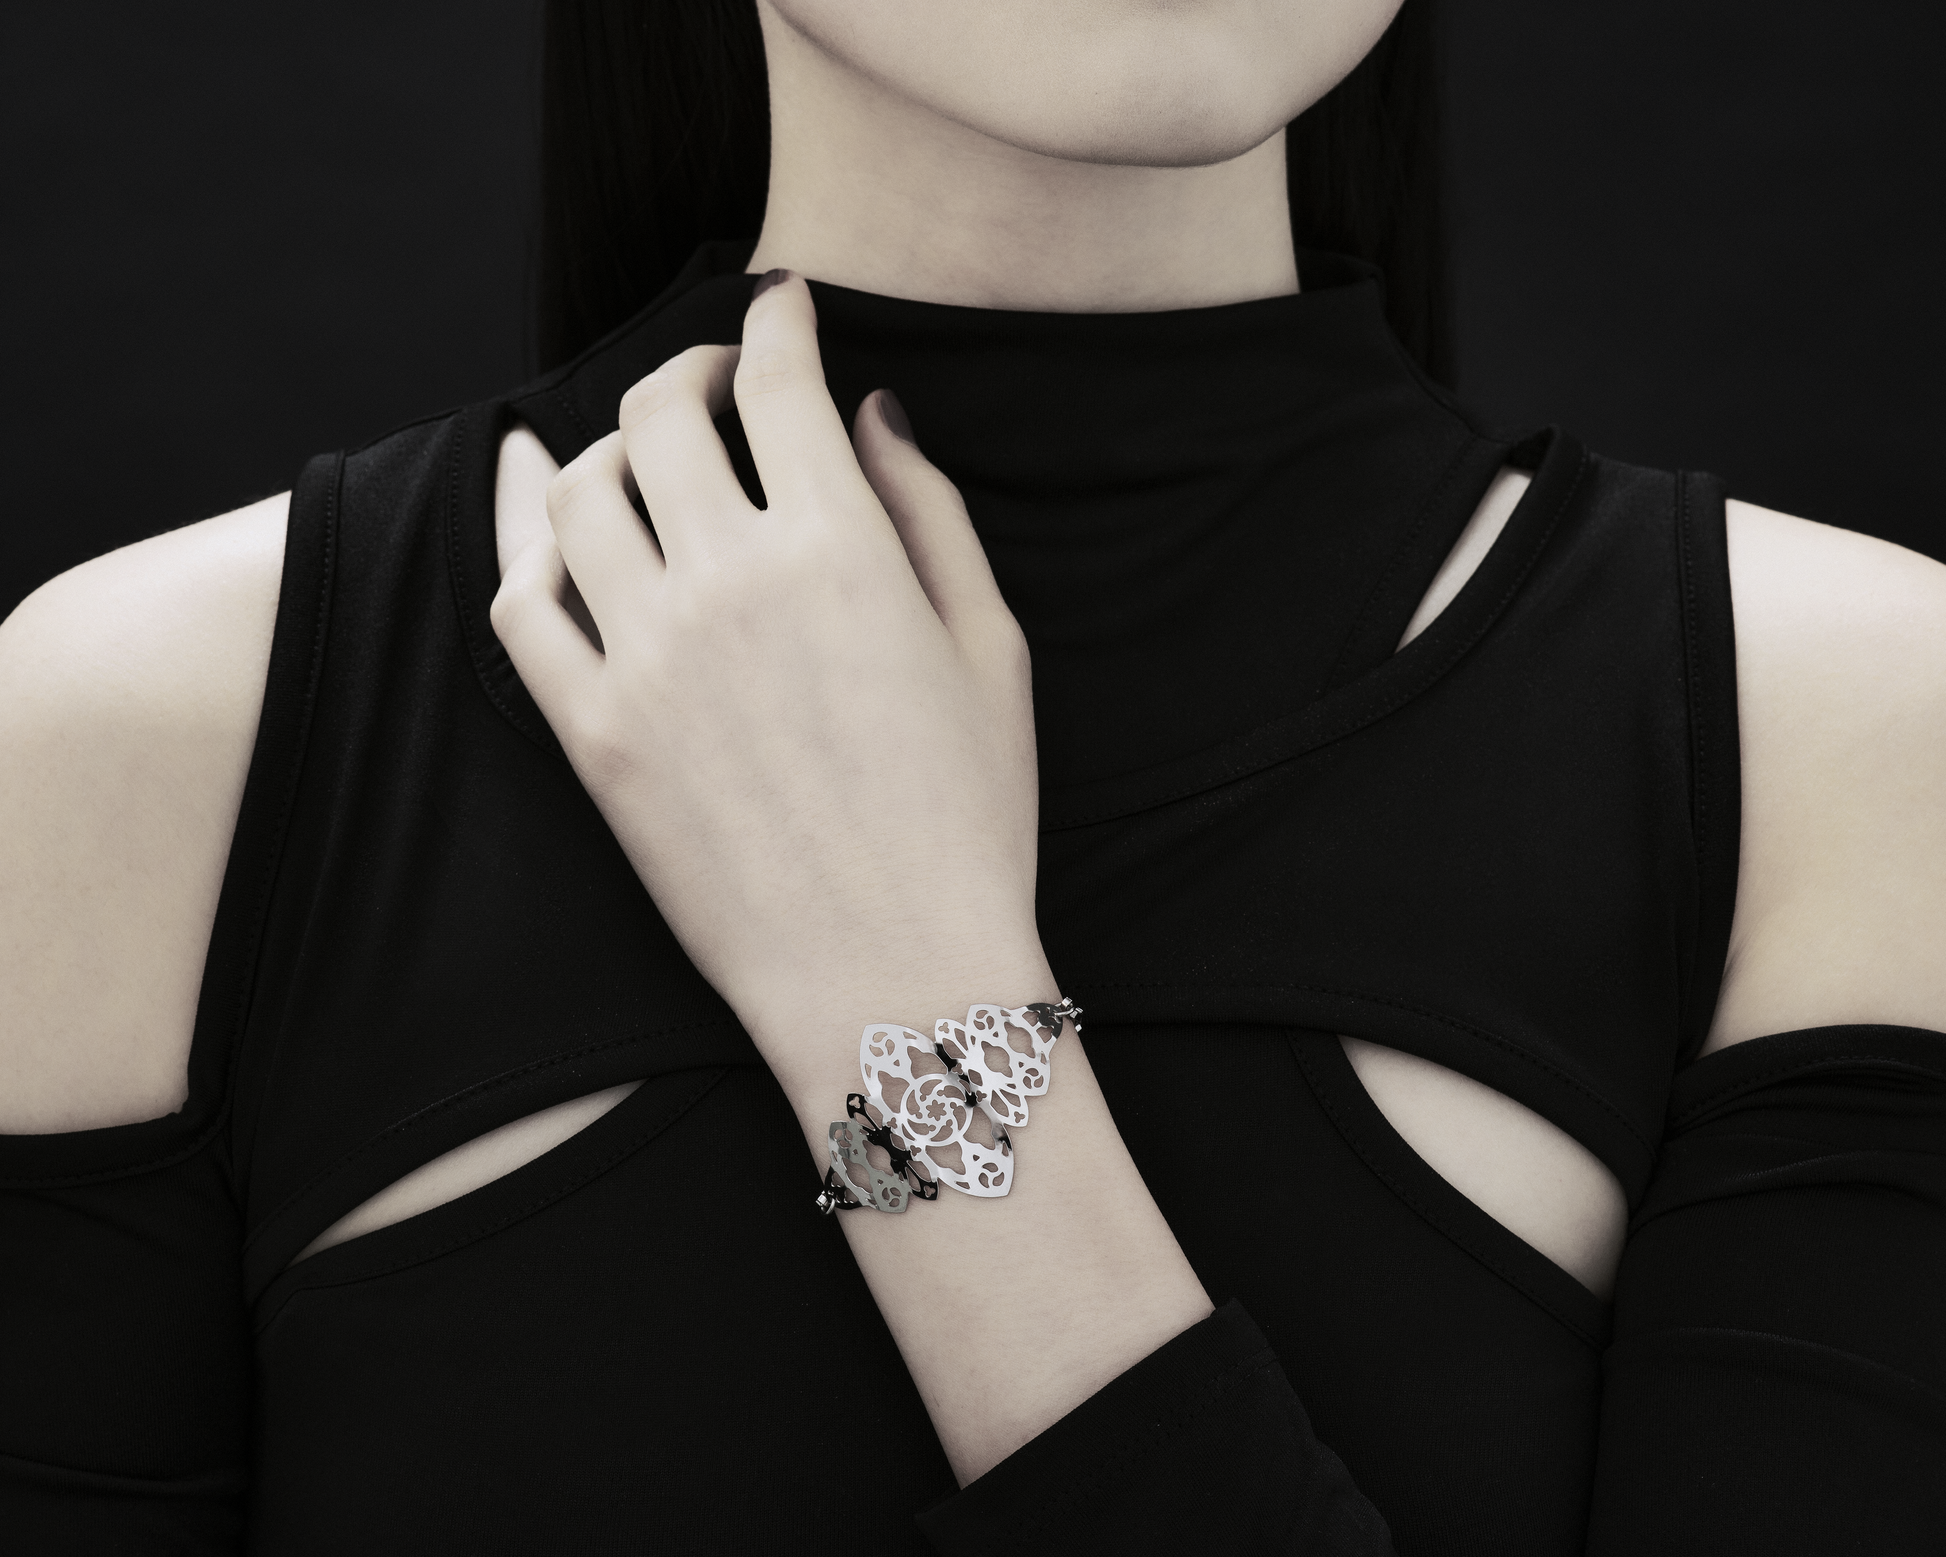  A model wears a Myril Jewels bracelet with intricate gothic architecture inspiration. The dark aesthetic of the bracelet contrasts elegantly with the model’s black attire, embodying the spirit of neo-goth jewelry. Perfect for those seeking a unique accessory for Halloween, everyday wear, or as a statement piece.